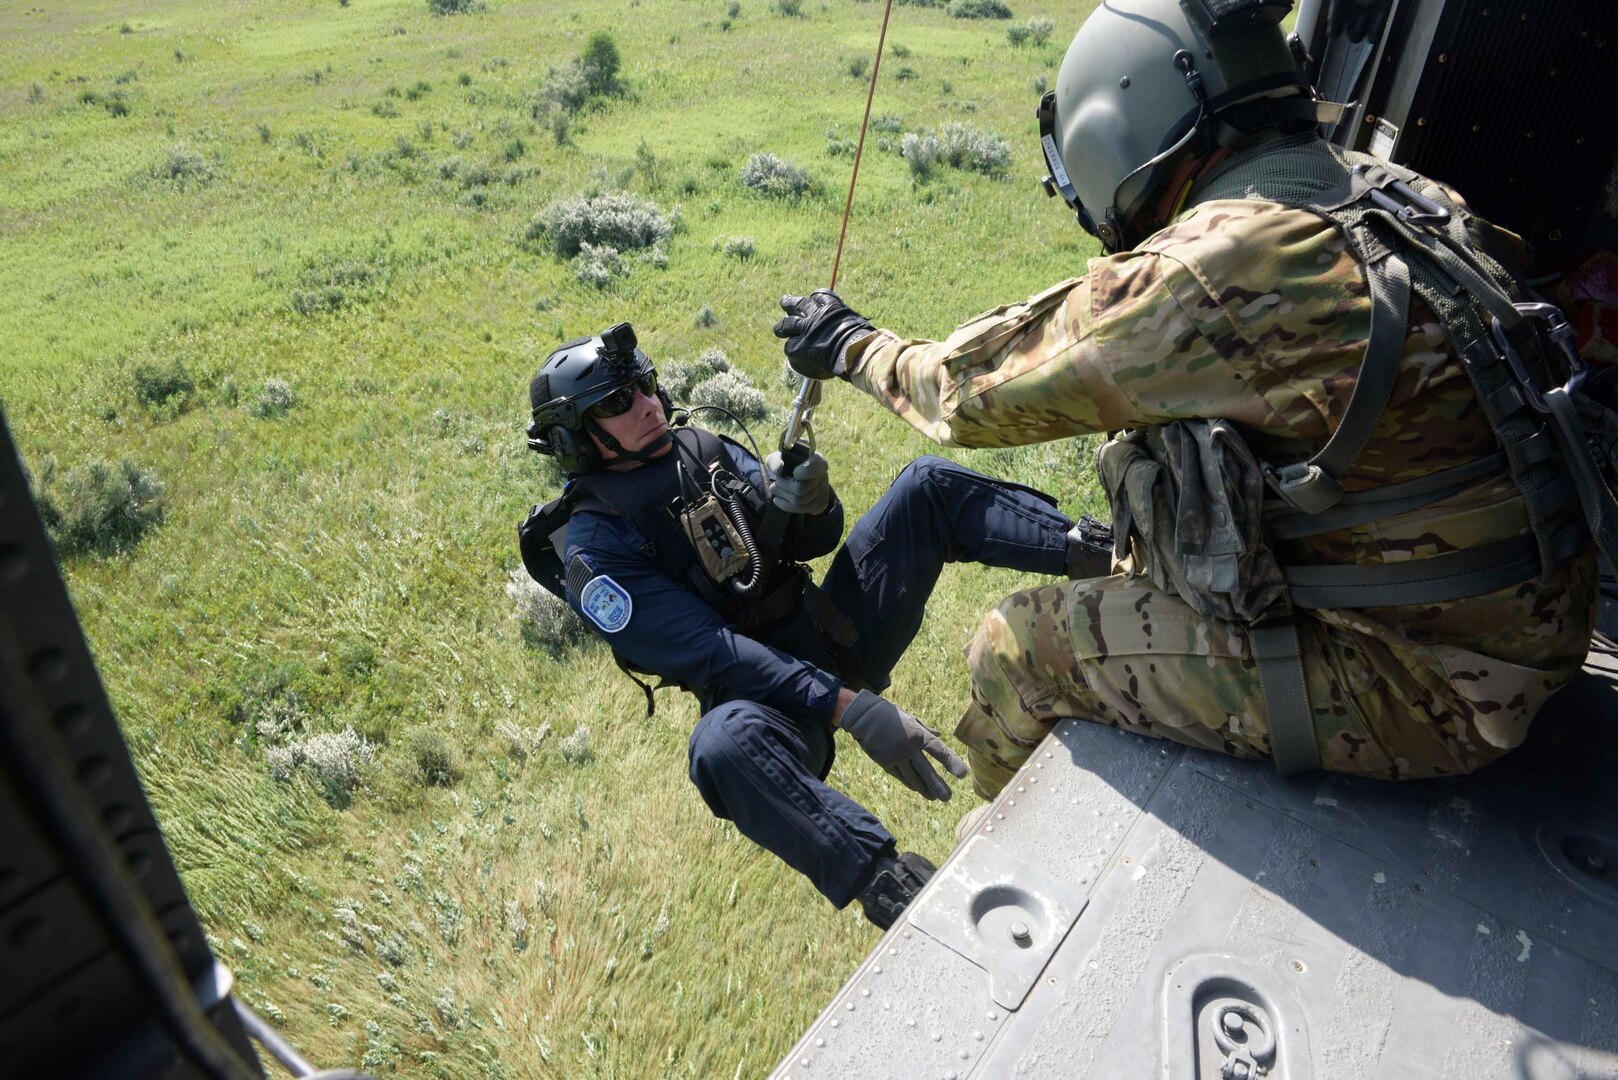 Sgt. Todd D. Overbeck, with C Company, 238th General Support Aviation Battalion, assists Brent VanBruaene, with the South Bend Fire Department, as he boards a UH-60 Black Hawk during hoist operations at Kingsbury, Indiana, July 23, 2019. Overbeck and VanBuraene are members of the Indiana Helipcopter Aquatic Rescue Team, a small team of National Guard members and firefighters with the South Bend fire Department.